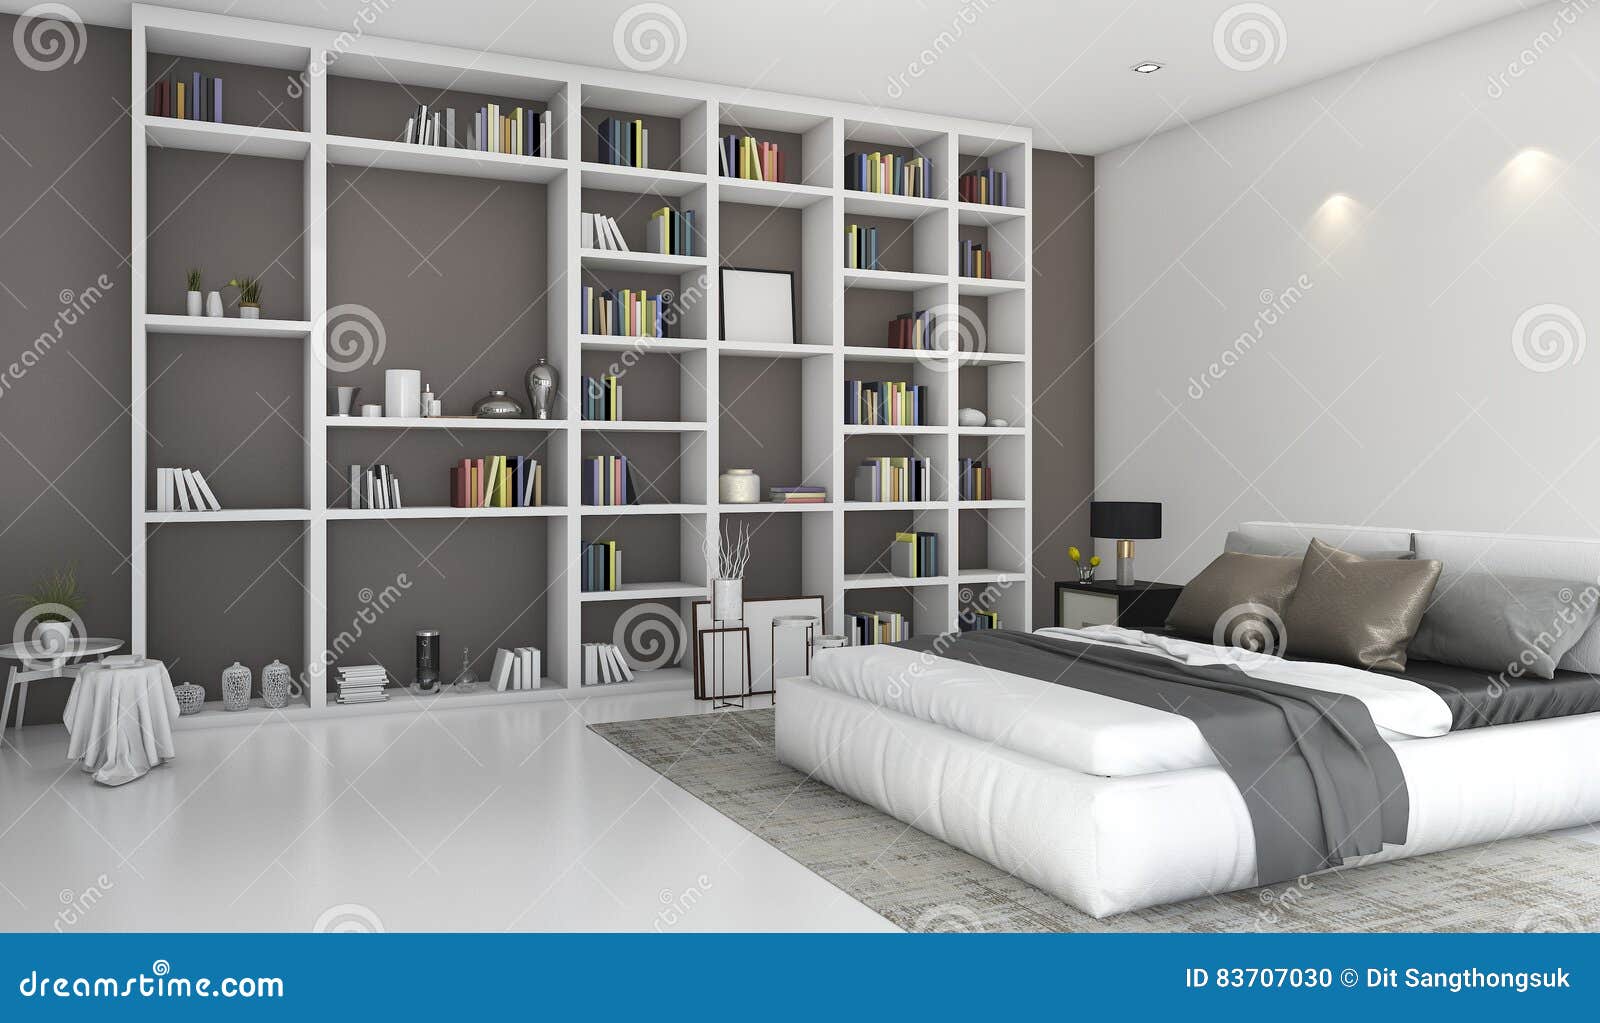 3d Rendering Contemporary Colorful Bedroom With Built In Bookshelf